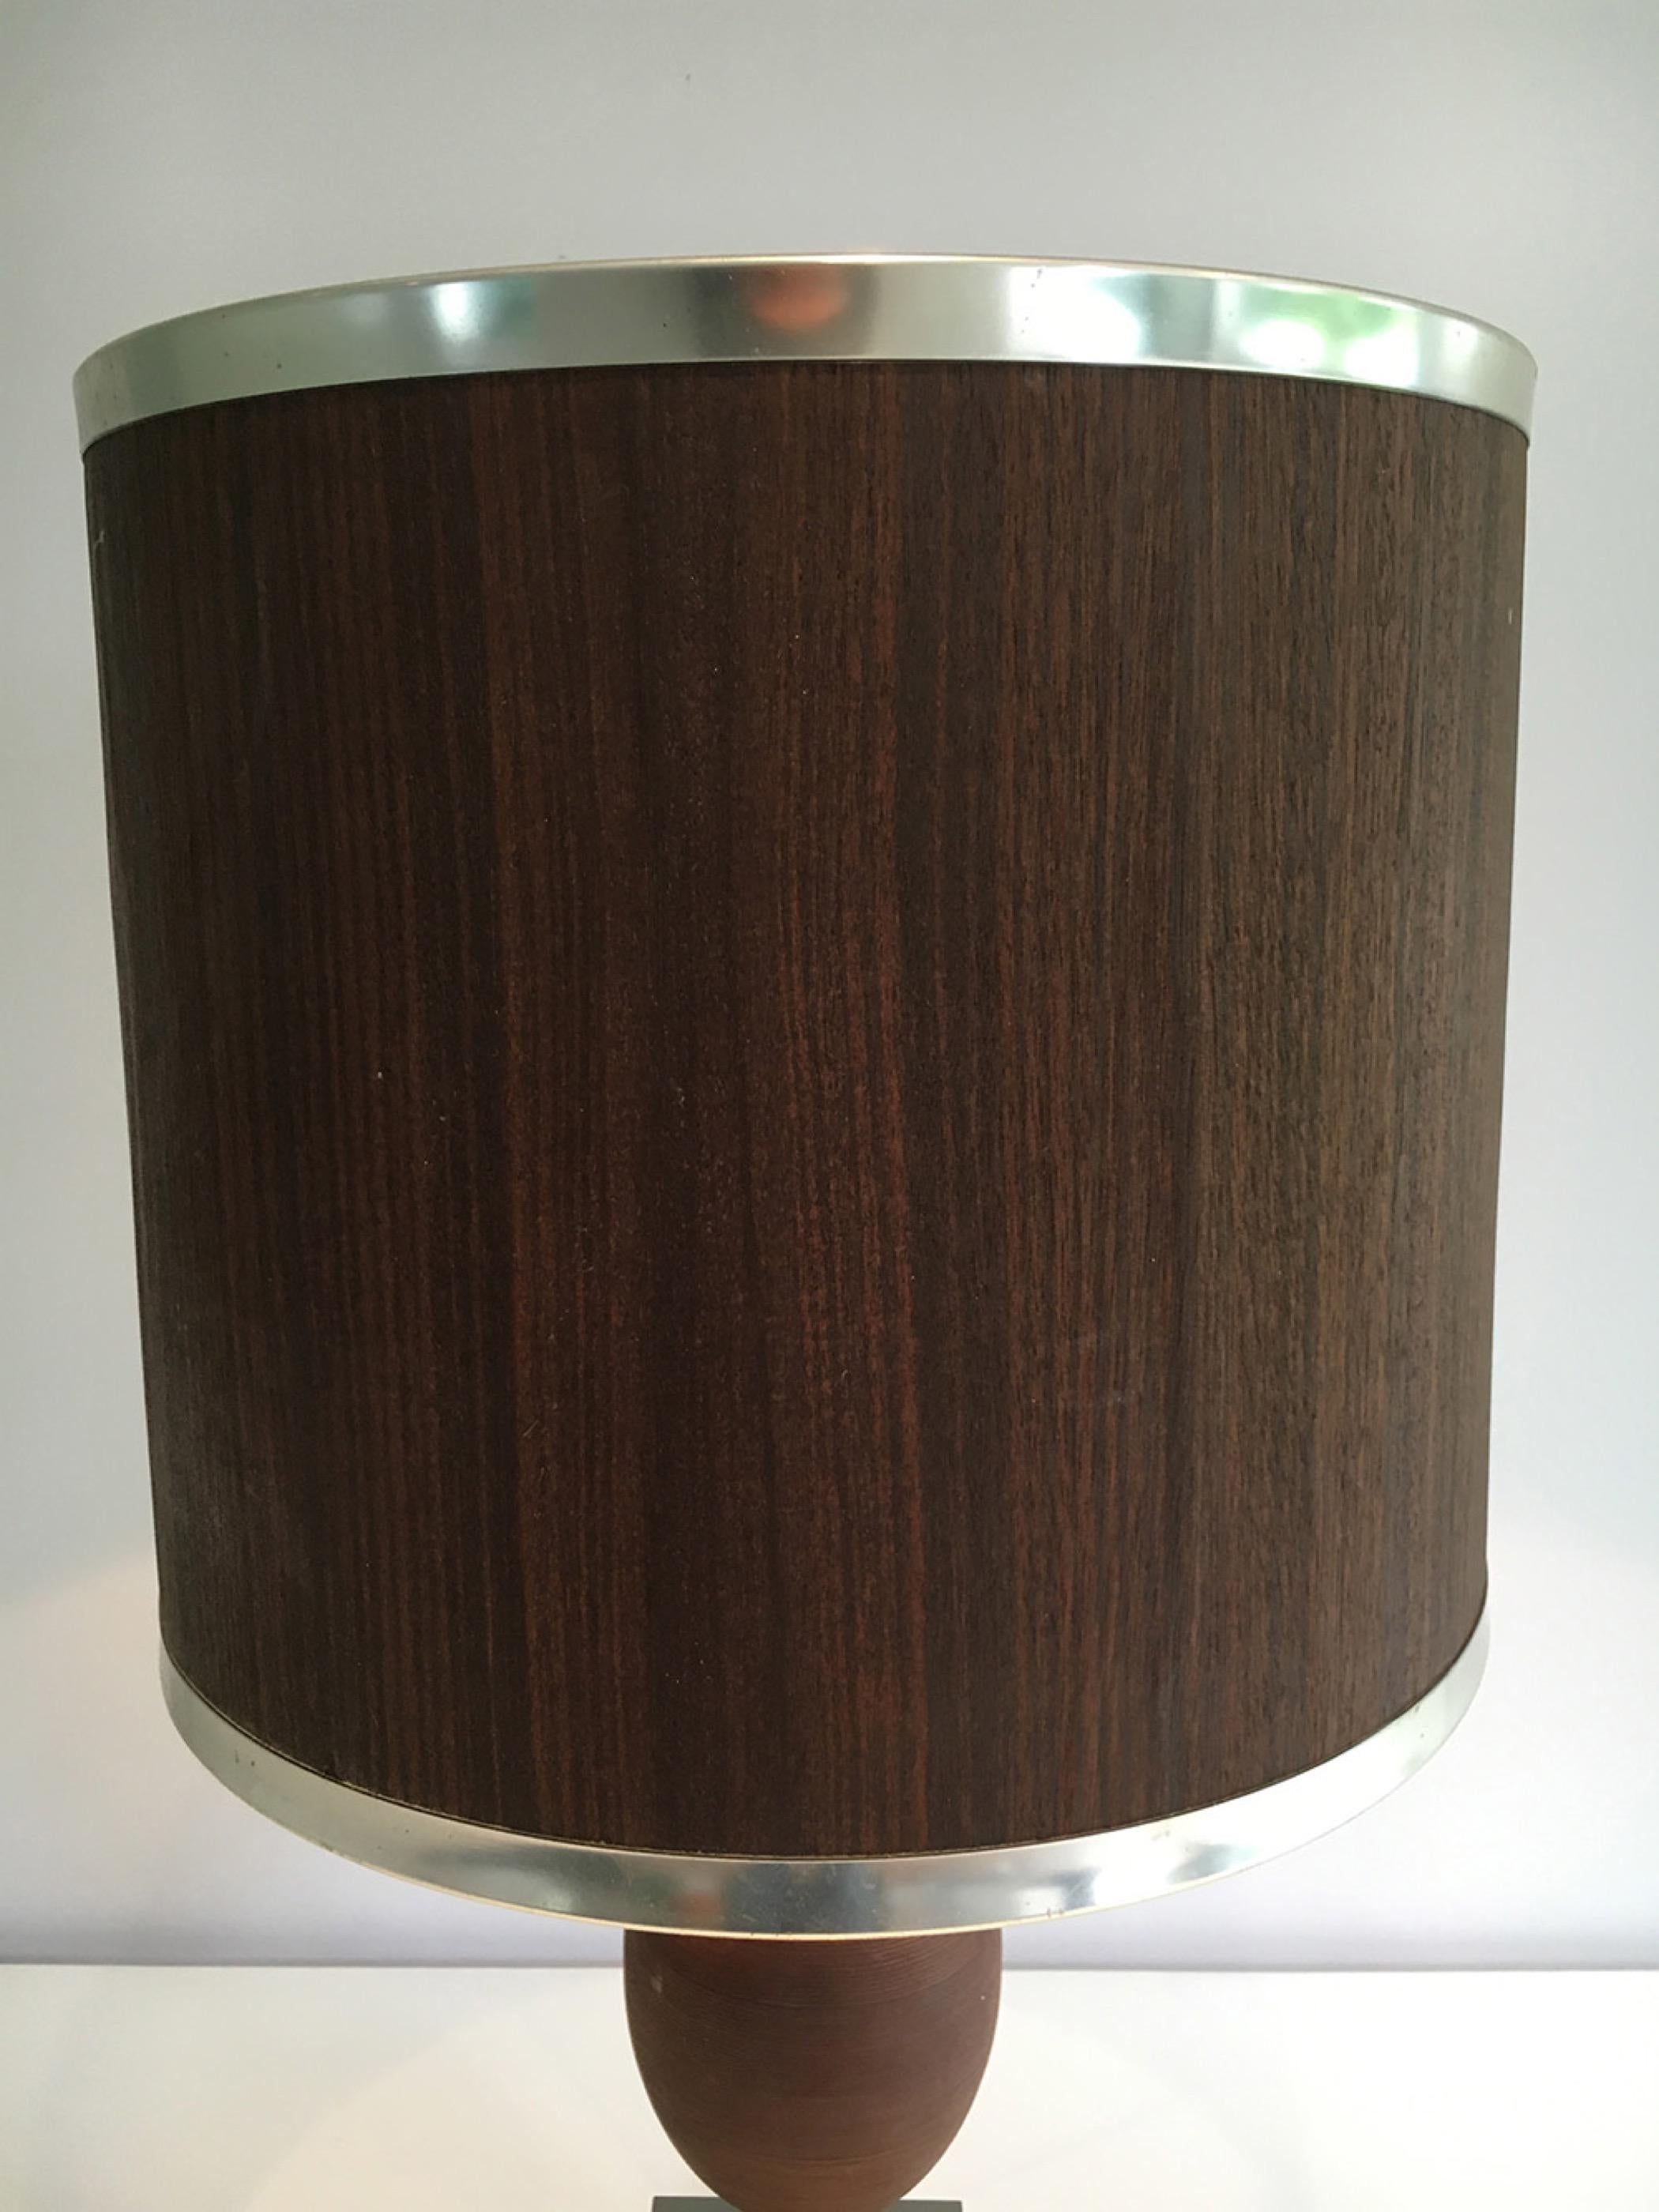 Wood and Brushed Steel Egg Lamp with Wooden Shade, circa 1970 For Sale 5